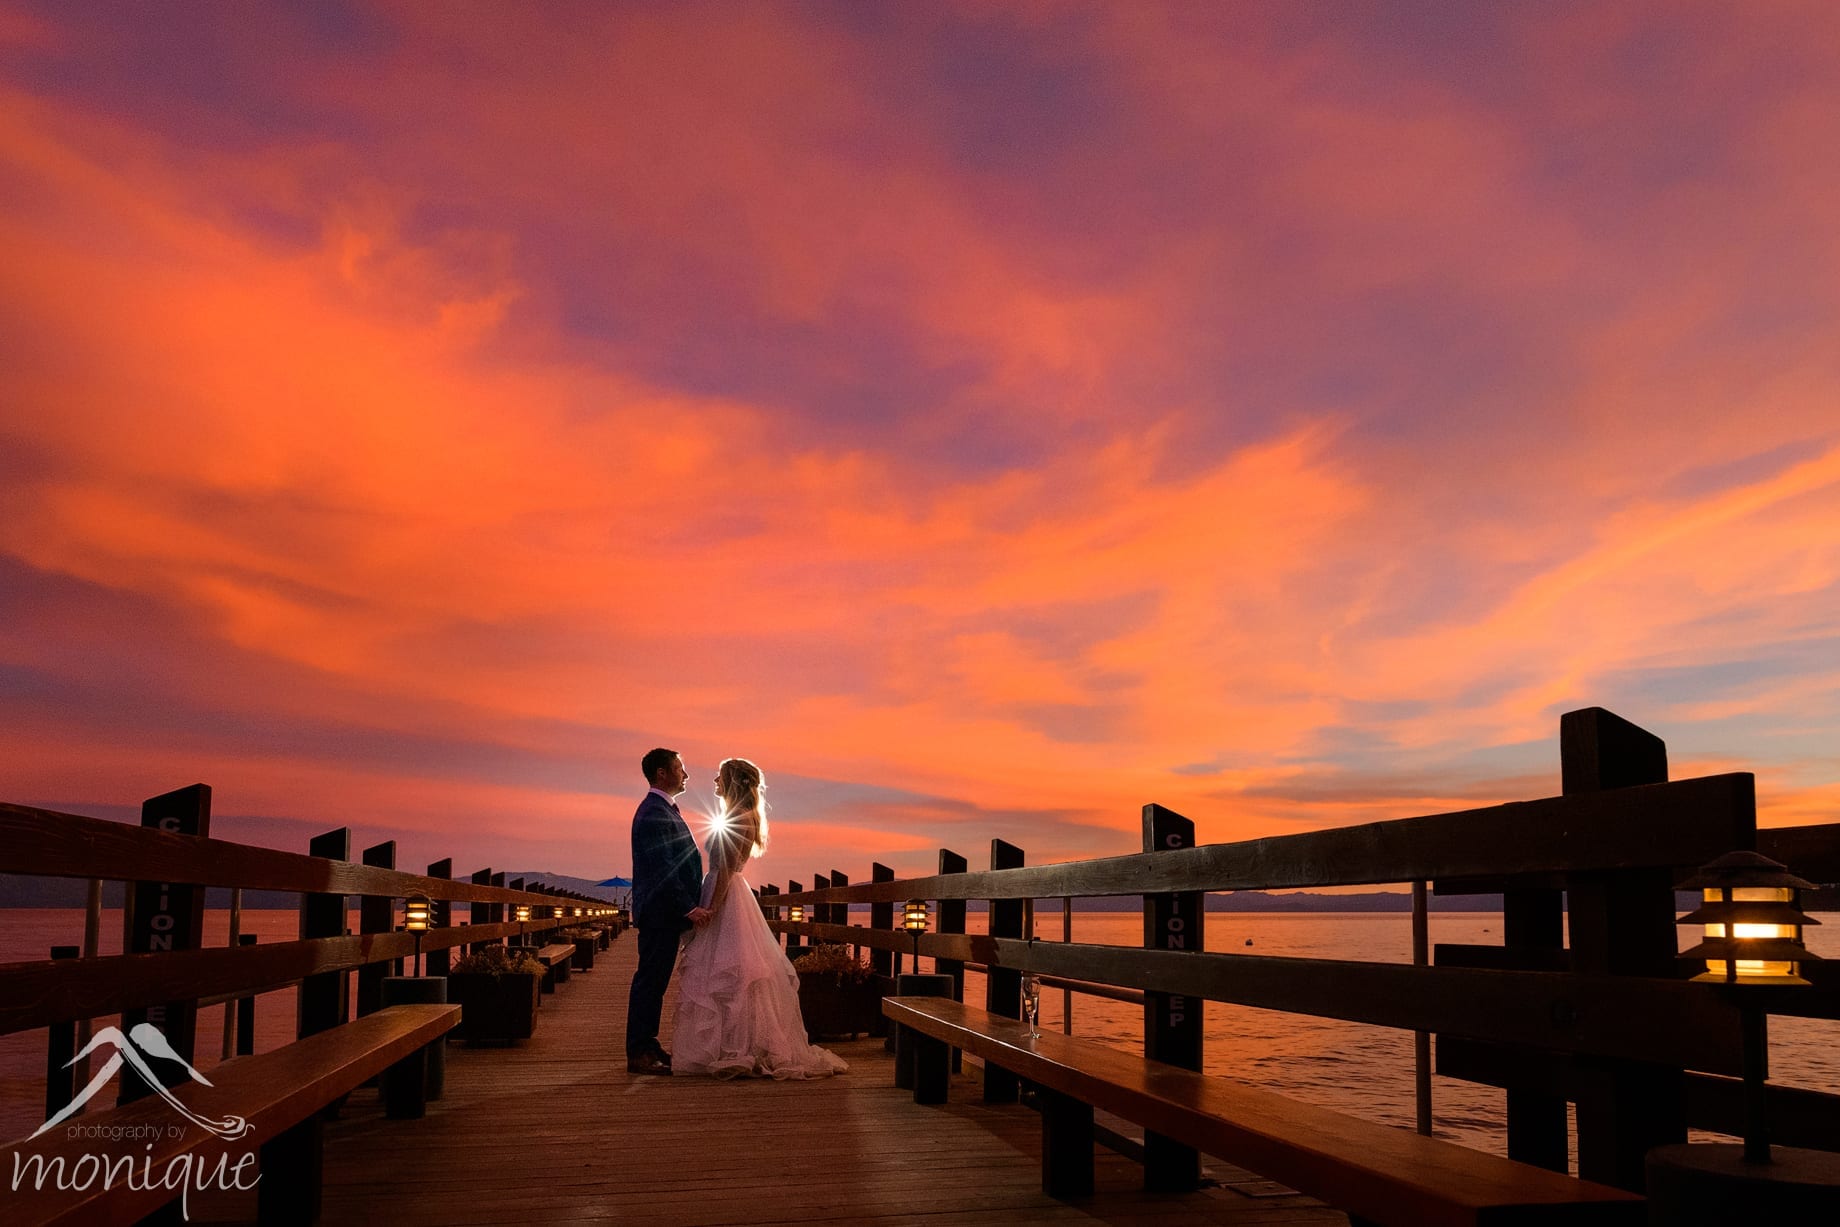 Gar Woods wedding photography with a spectacular sunset by Photography by Monique